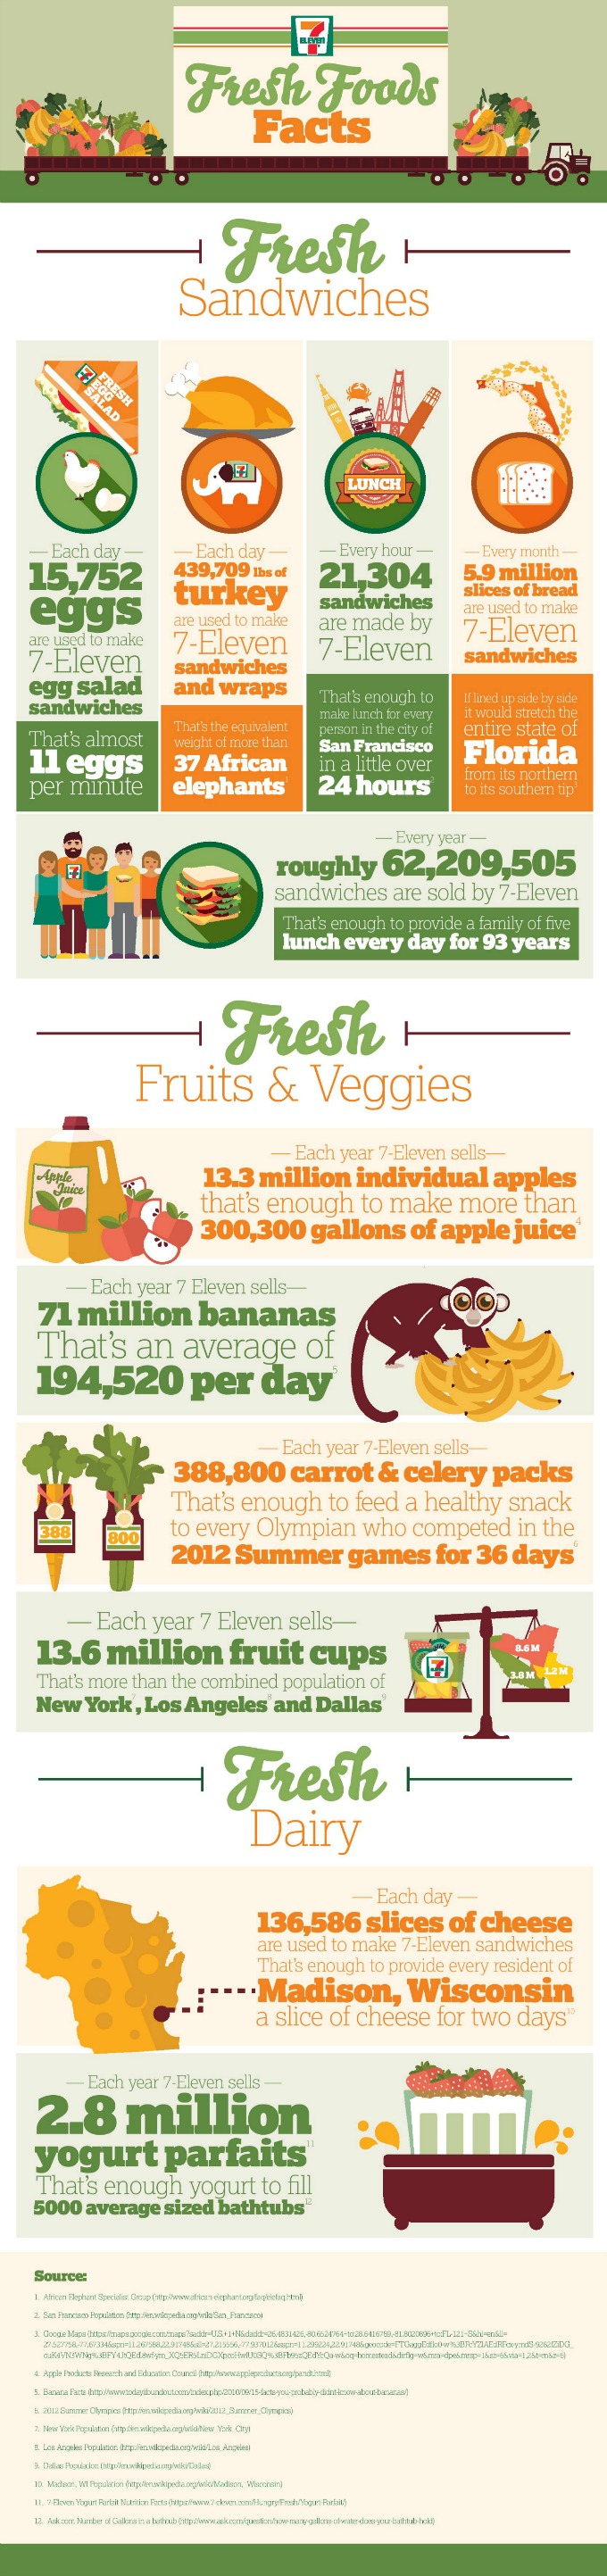 7-Eleven Fresh Foods to Go Infographic